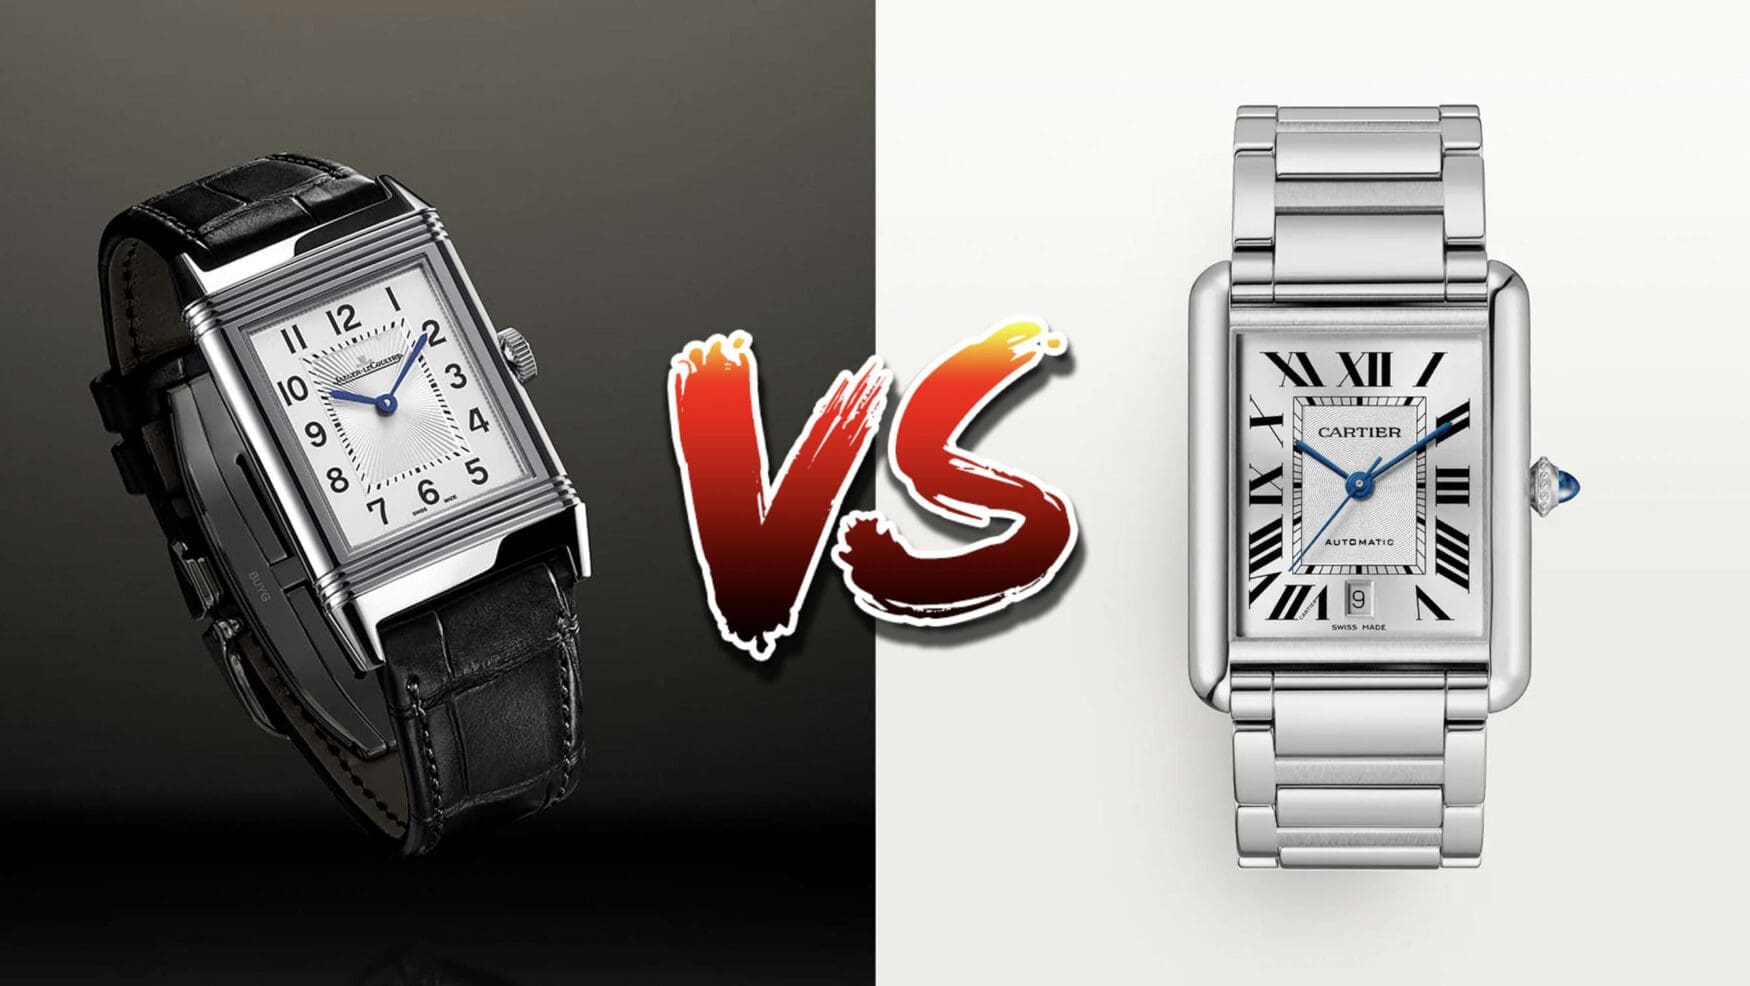 Jaeger-LeCoultre Reverso and Cartier Tank- how do the two icons stack up?